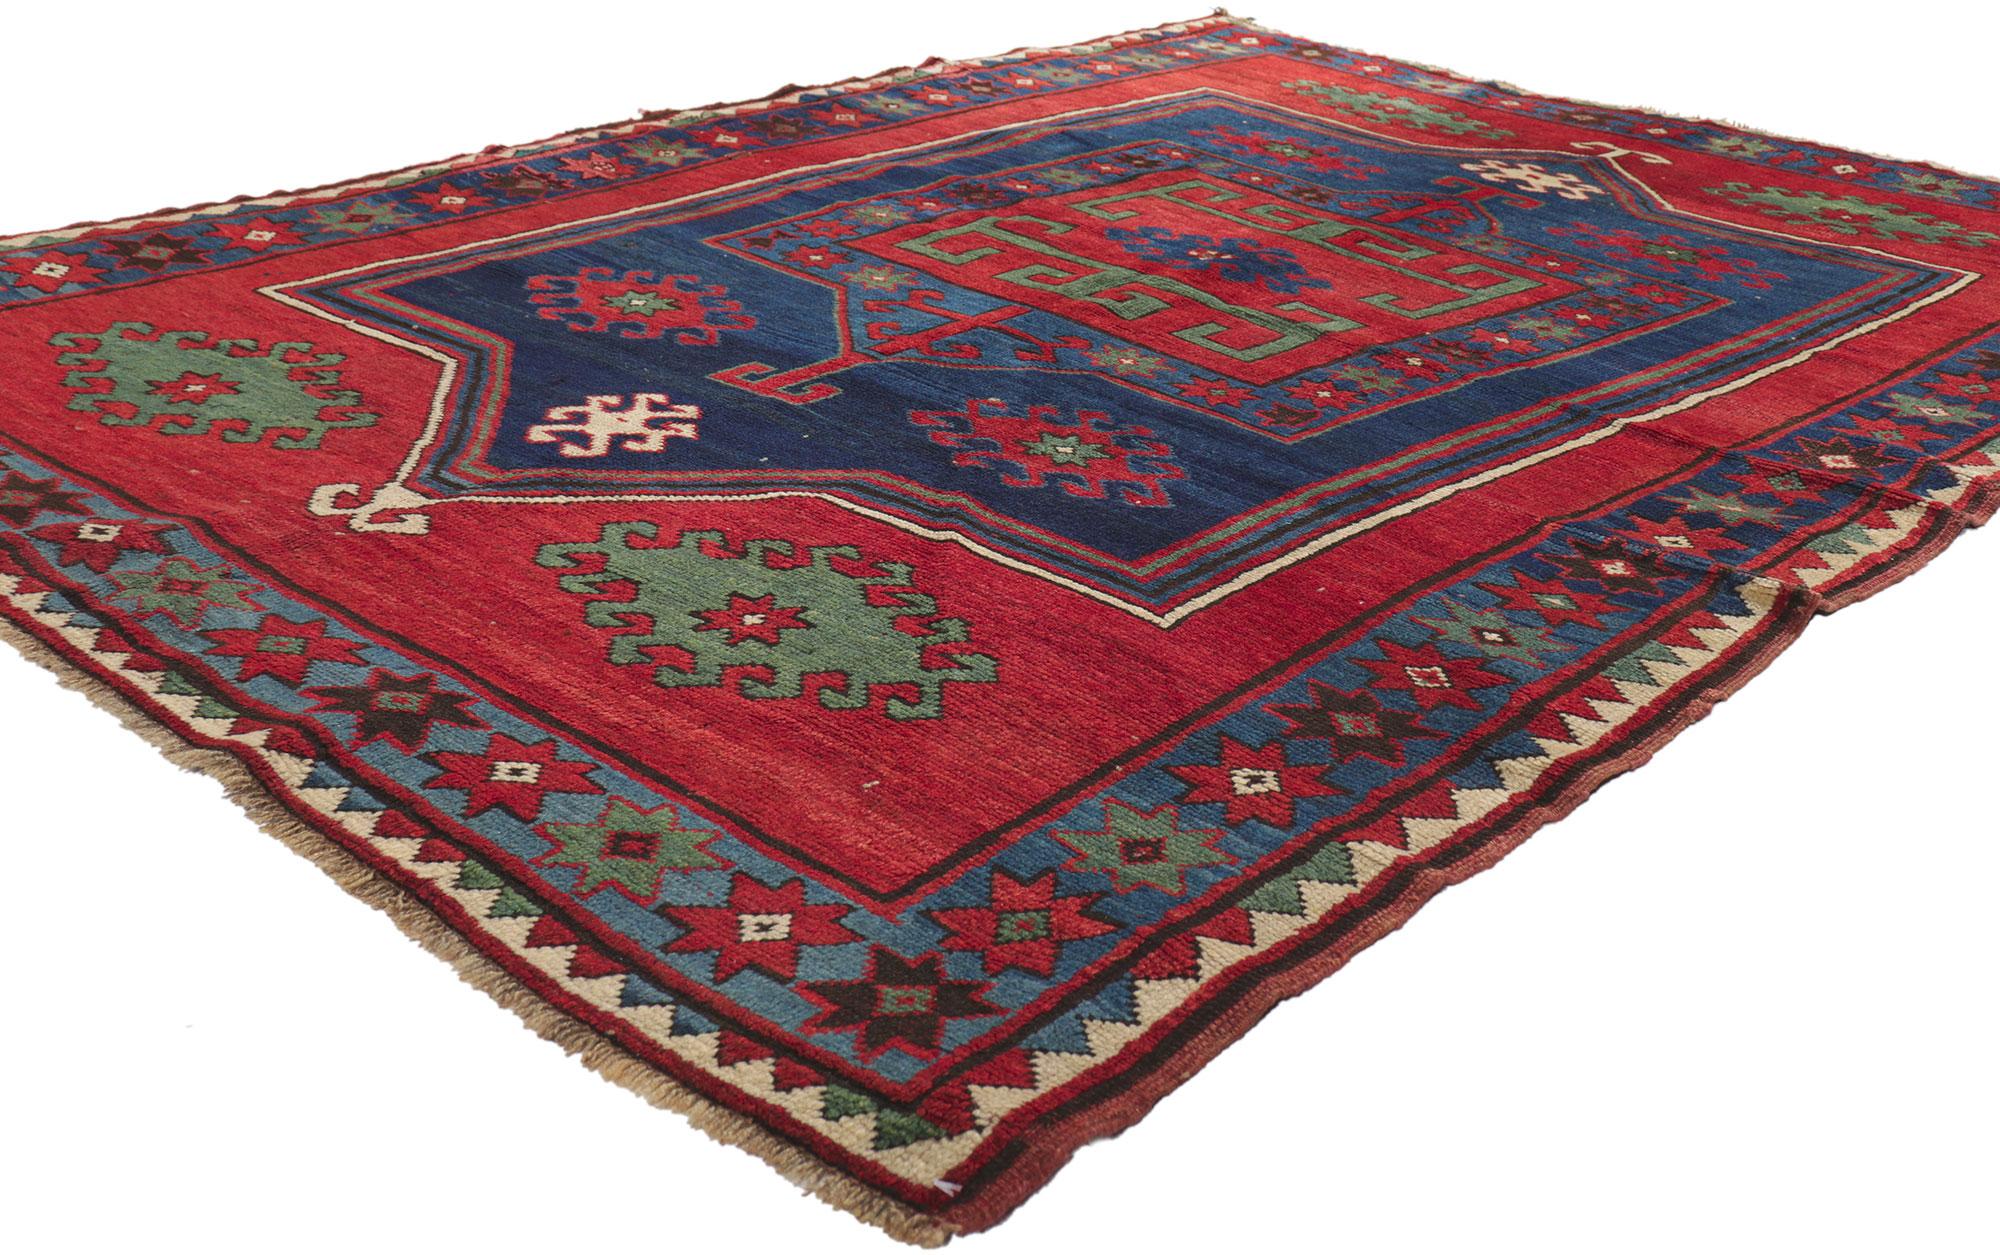 73293 Antique Red Caucasian Kazak Rug, 05'00 x 06'11. Caucasian Kazak rugs are handwoven carpets originating from the Caucasus region, particularly among the Kazakh people. Known for their bold geometric patterns, vibrant colors like red, blue, and